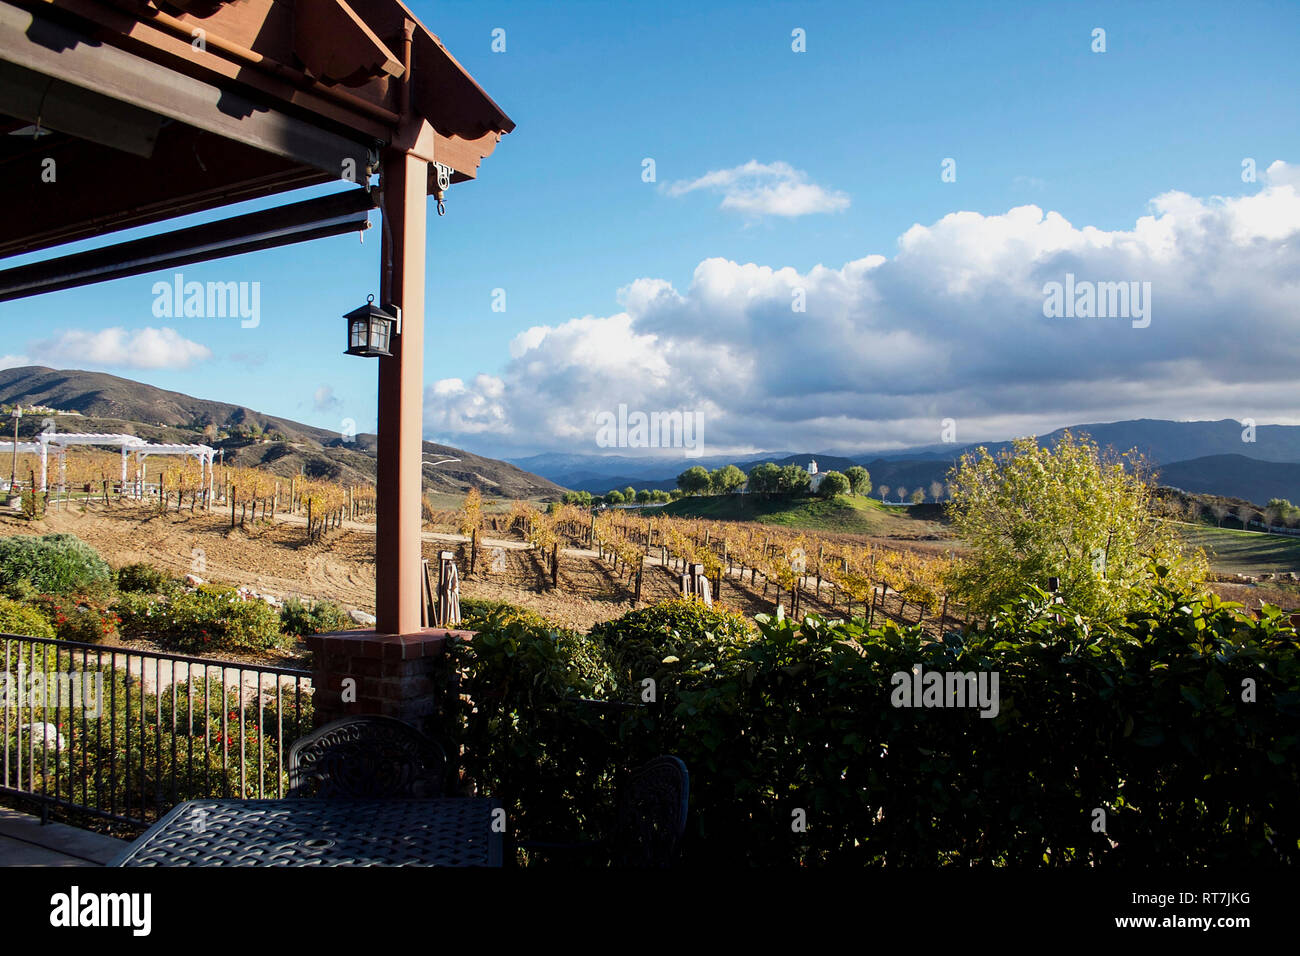 View from wineries in Southern California, USA Stock Photo